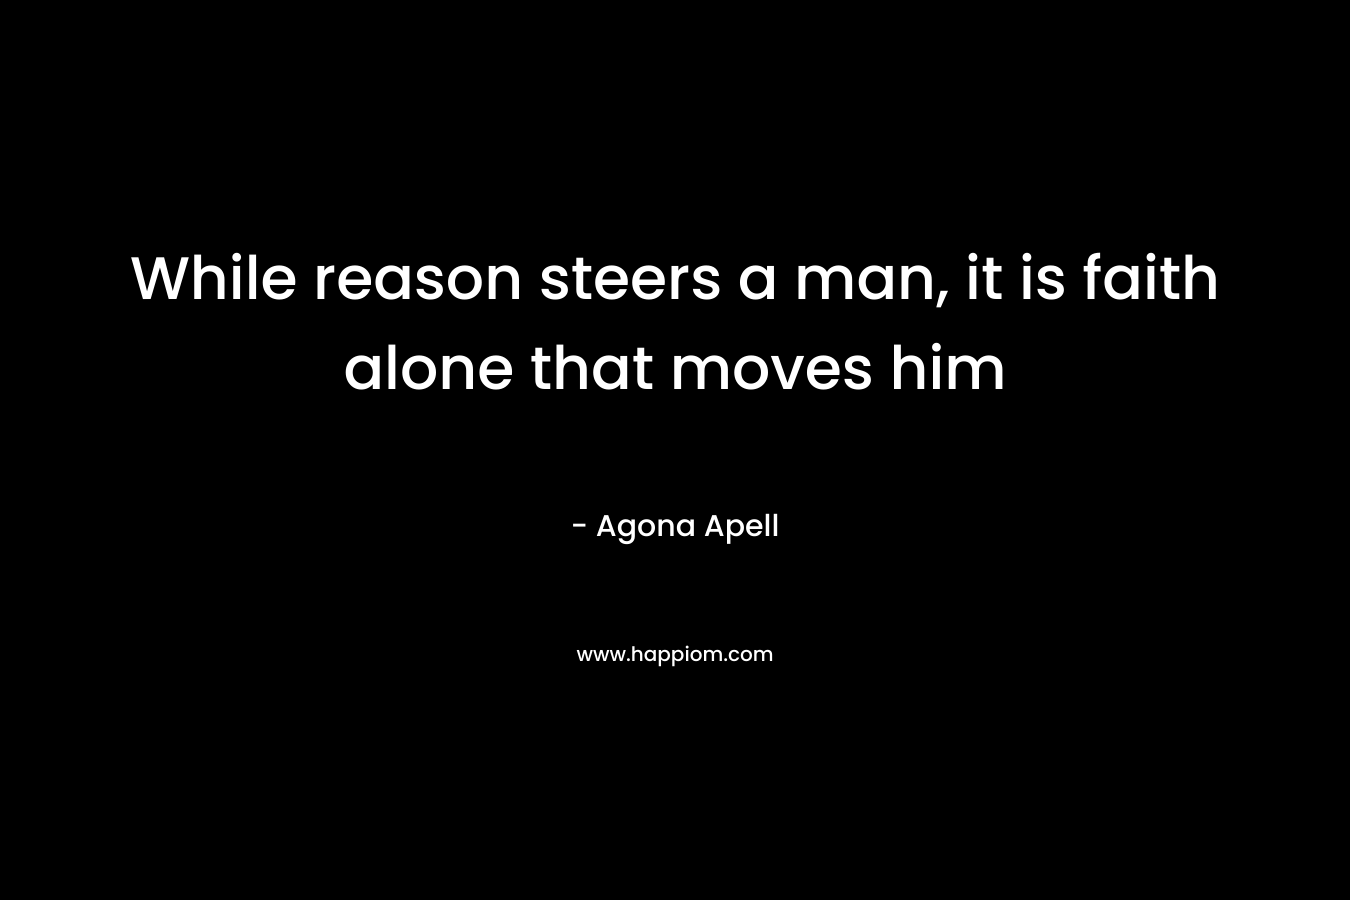 While reason steers a man, it is faith alone that moves him – Agona Apell